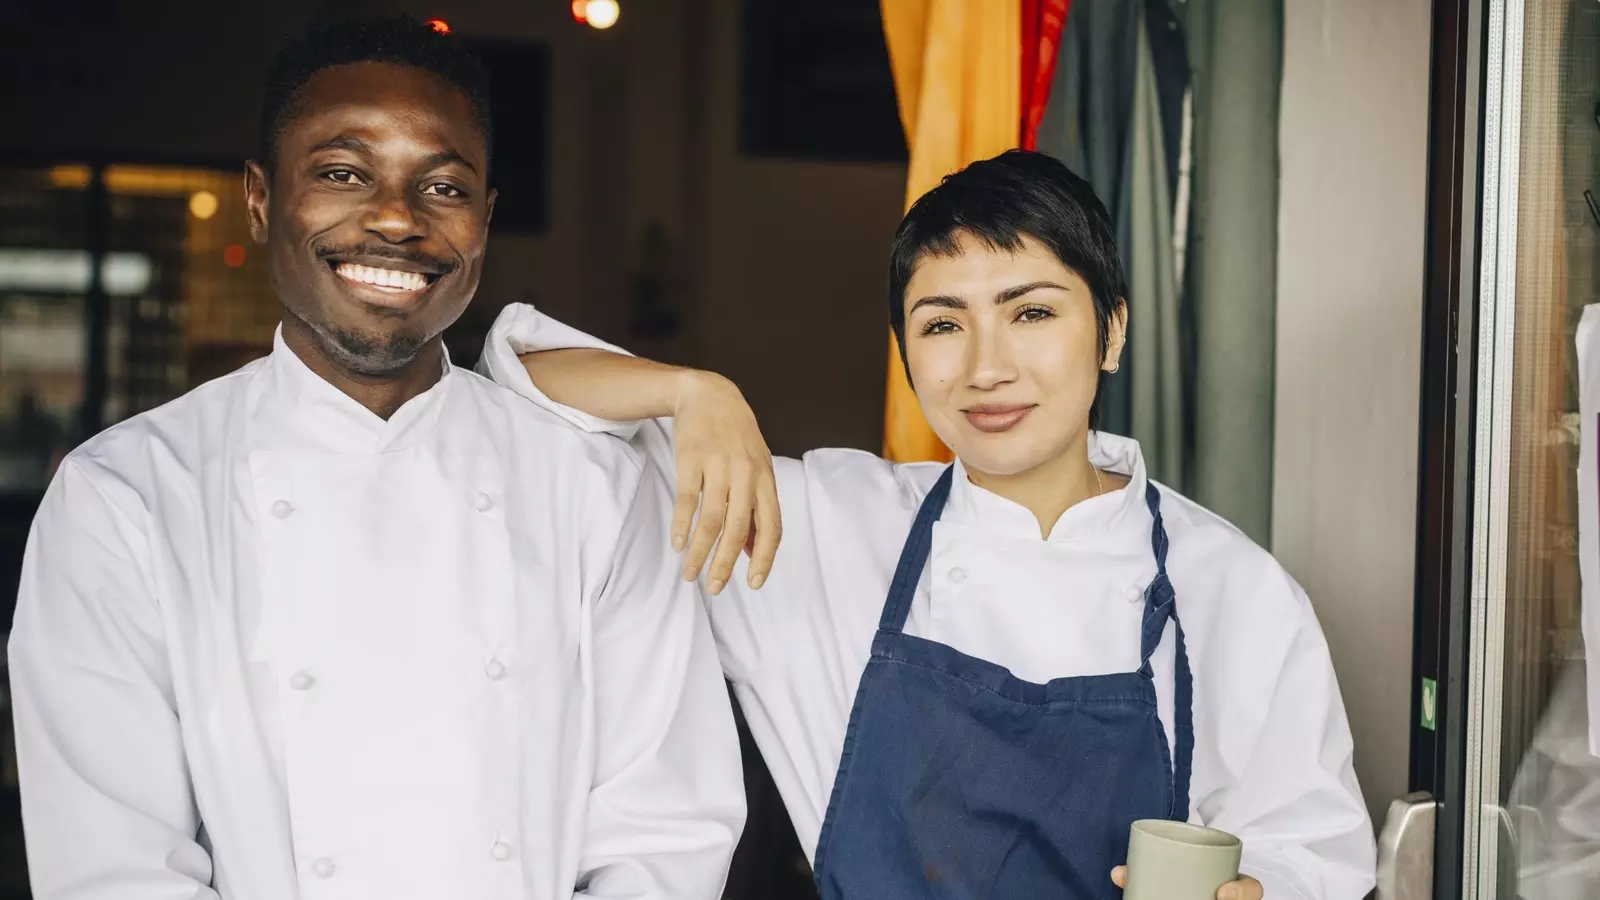 Two smiling restaurant workers